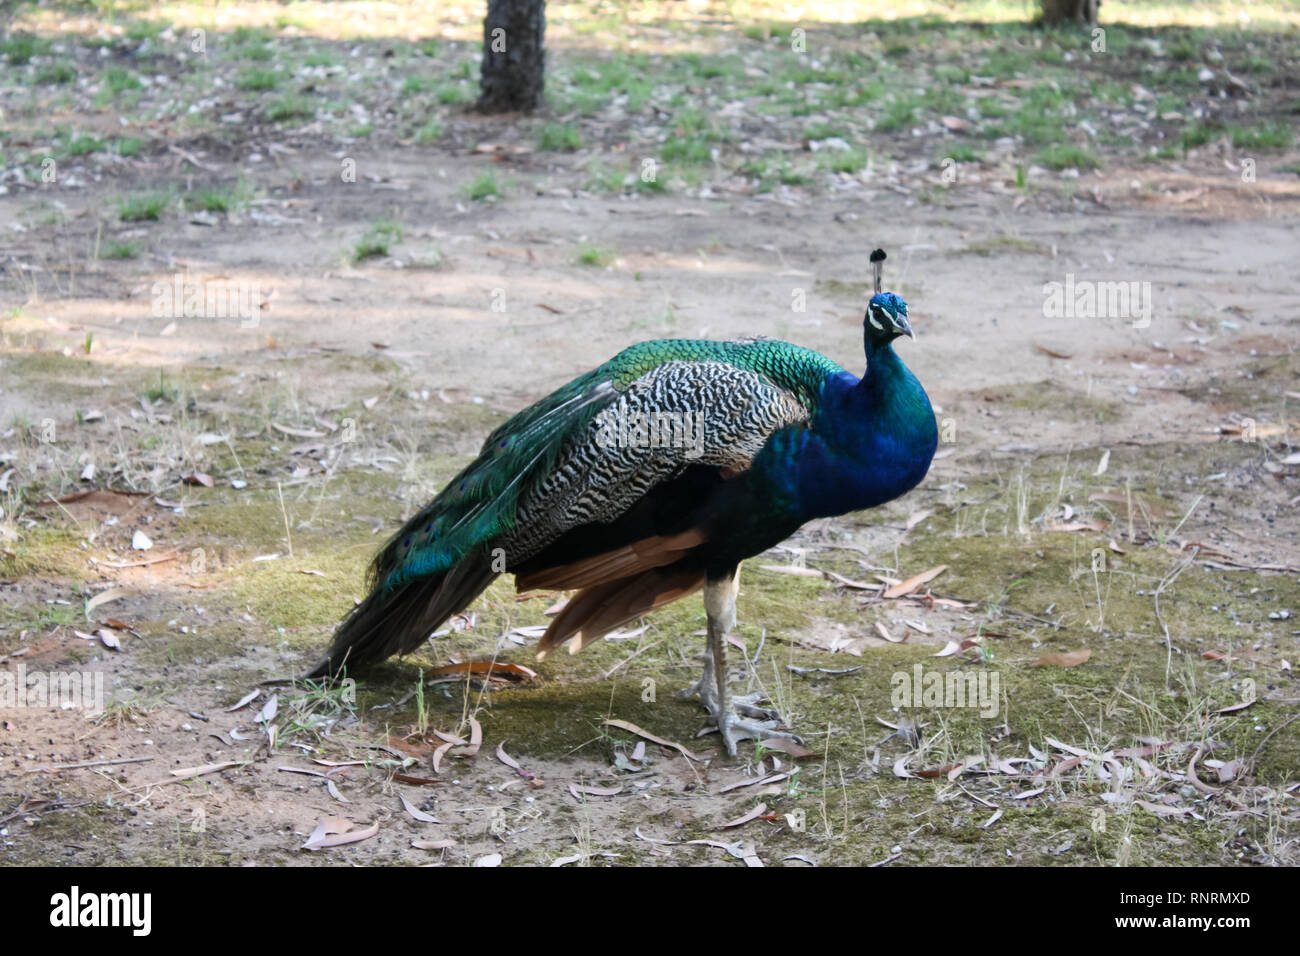 Blue and green peacock male on grass Stock Photo